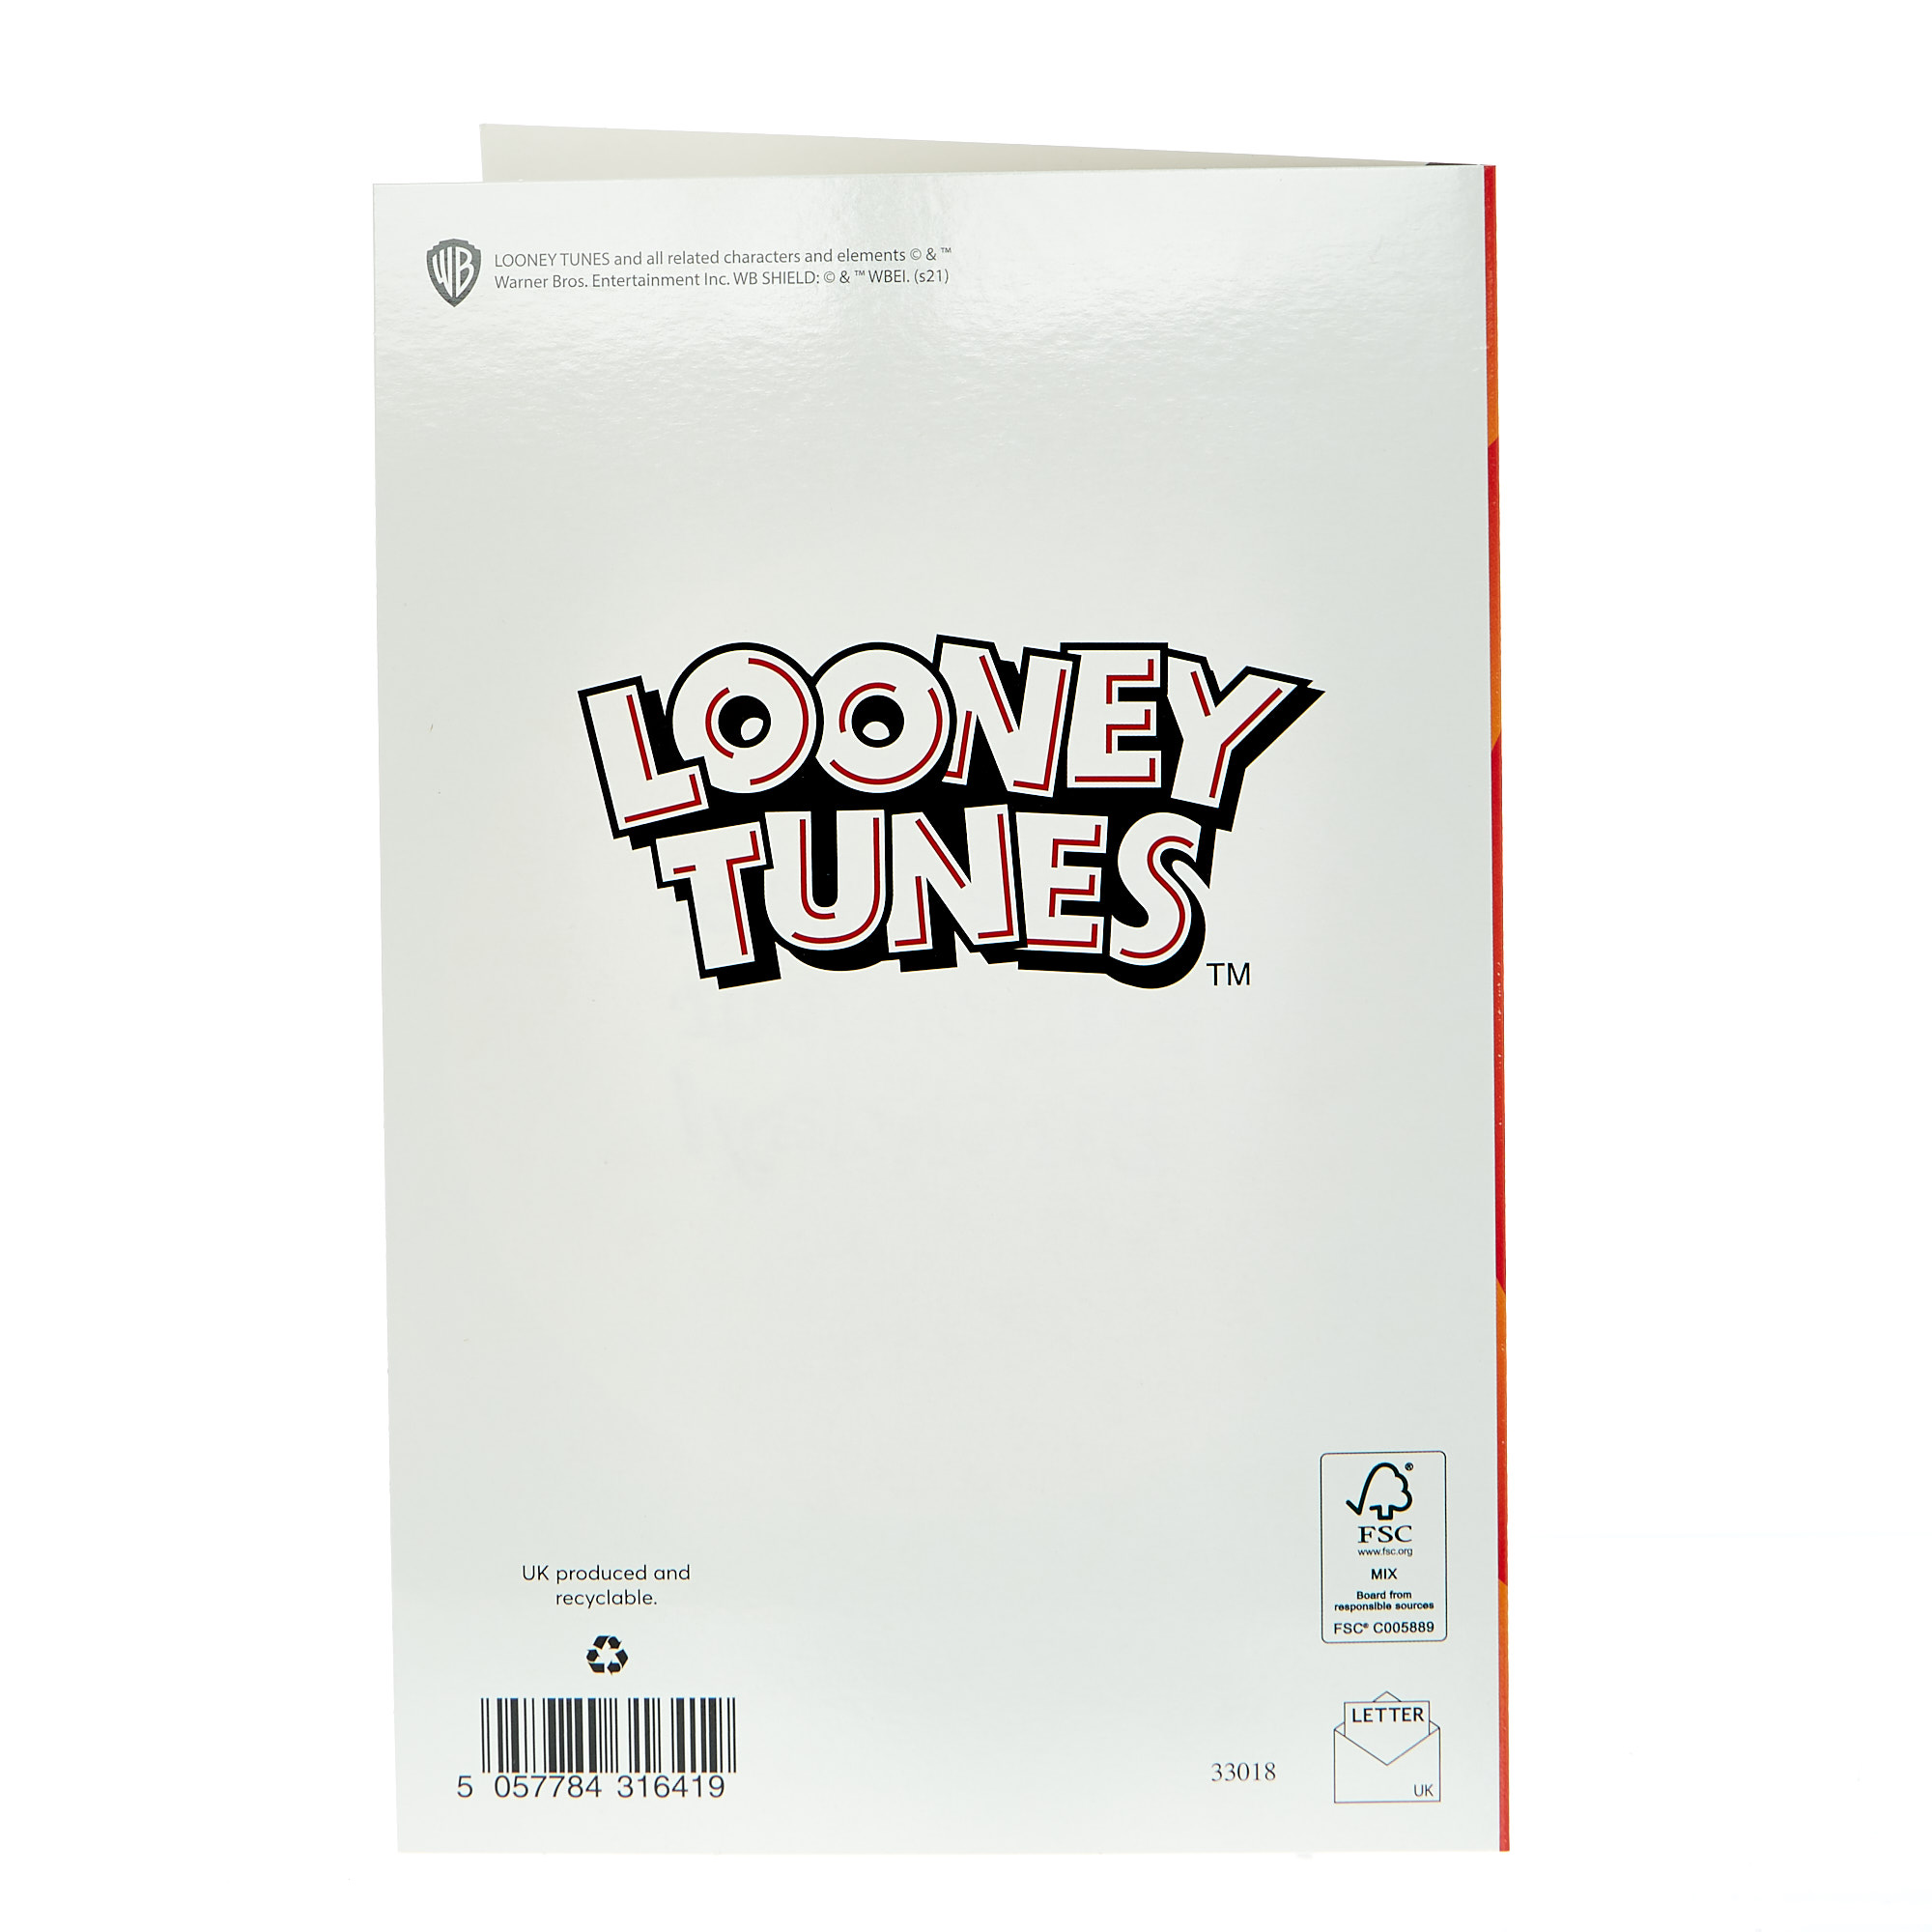 Looney Tunes Birthday Card - It's Party Time!